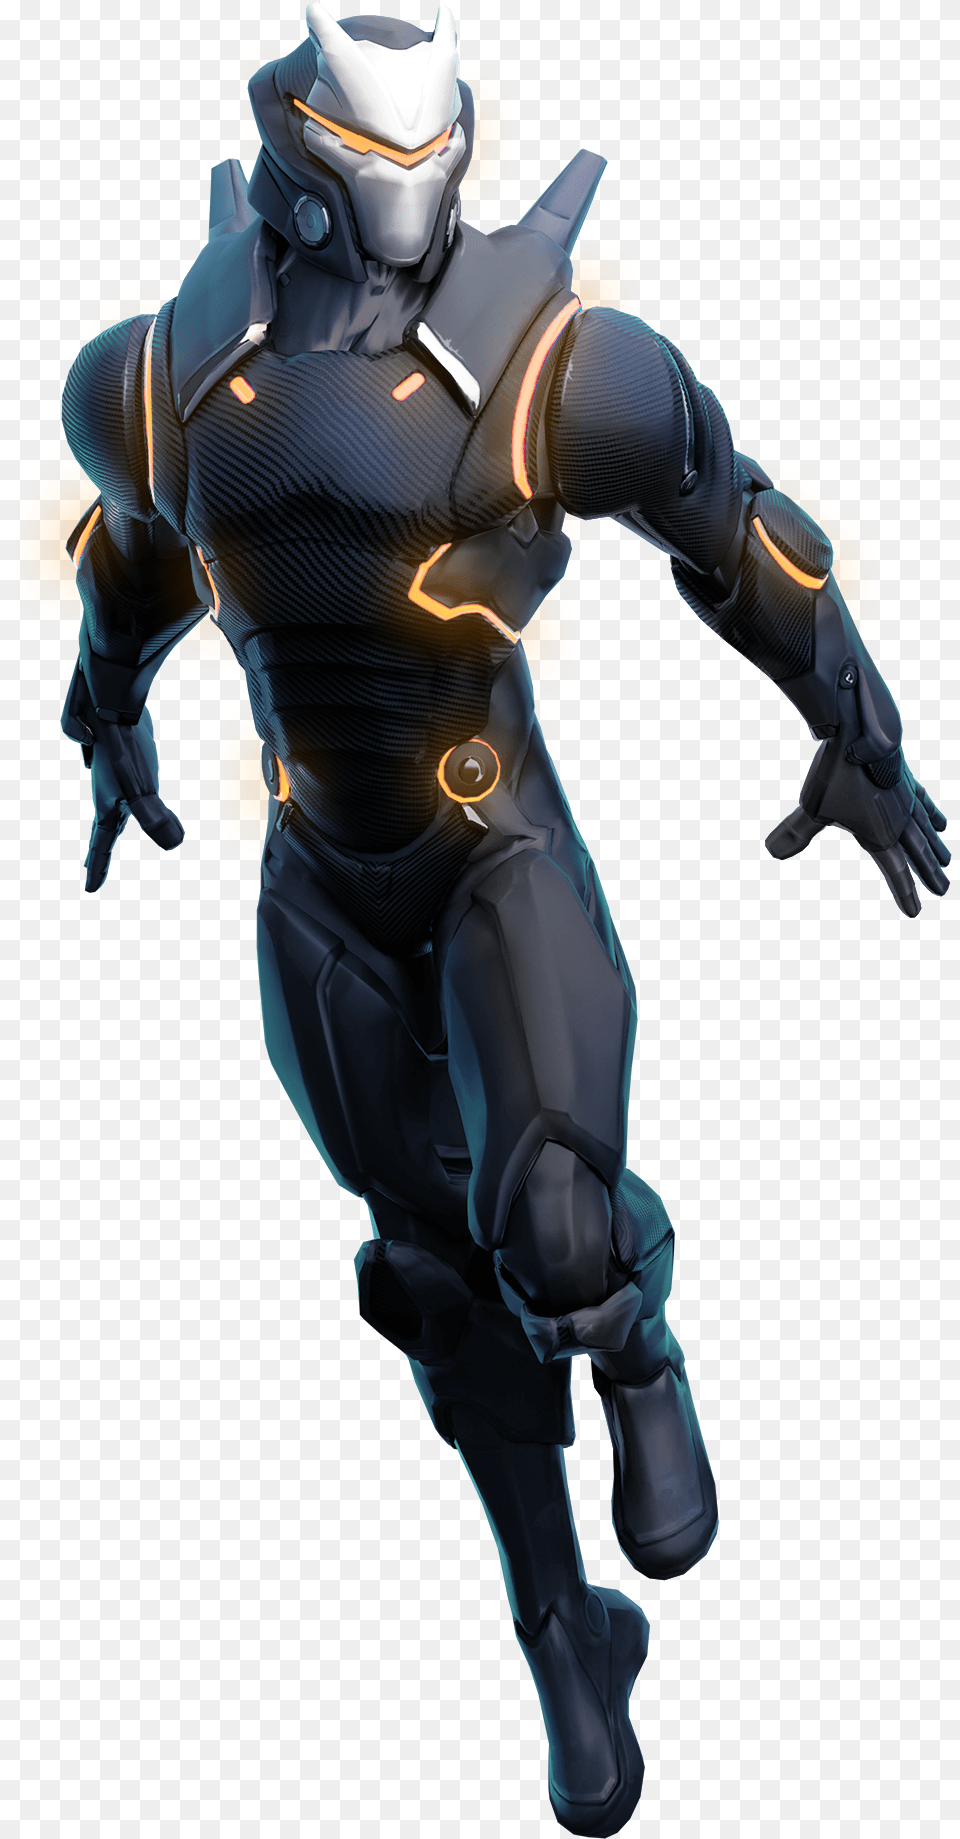 Download Hd Share This Fortnite Omega Render Fortnite Omega, Adult, Female, Person, Woman Png